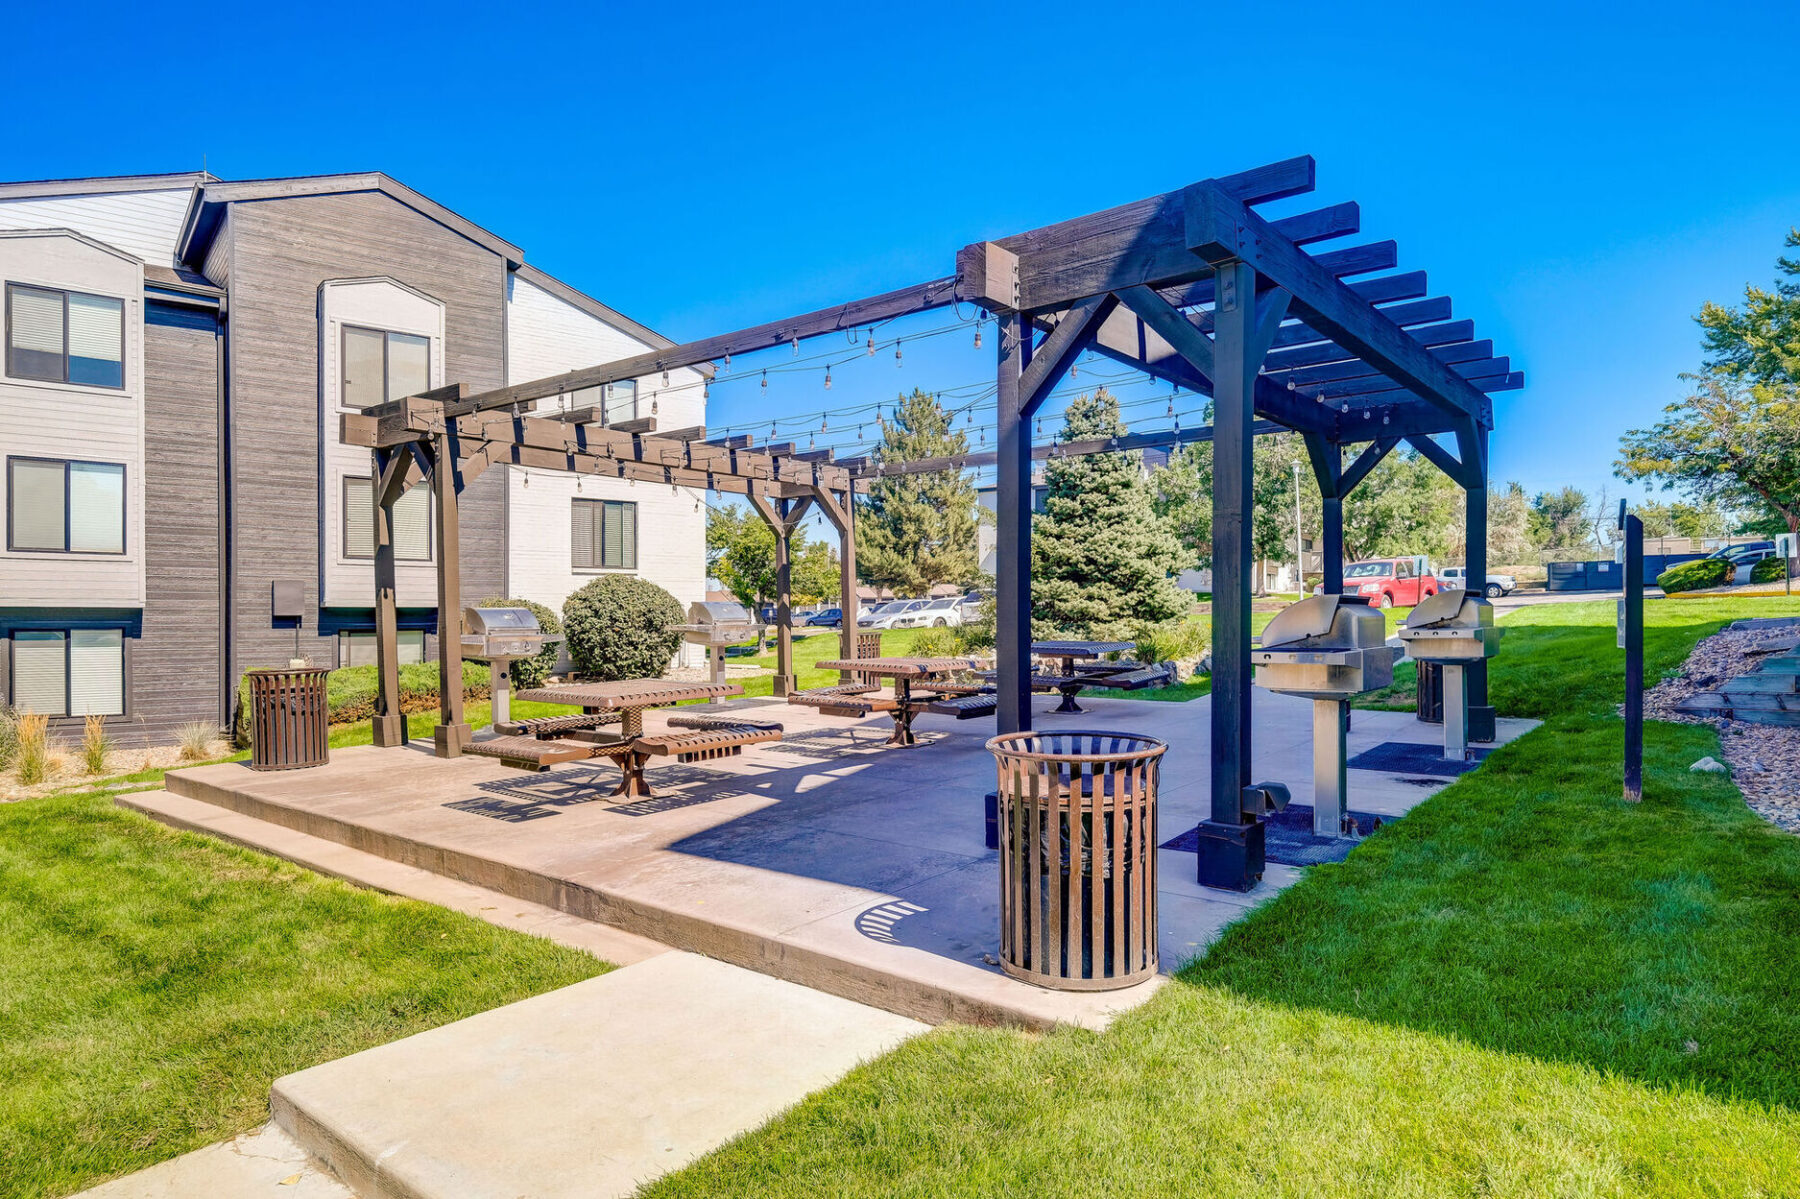 Outdoor covered grill area with picnic tables and residential buildings in the back ground